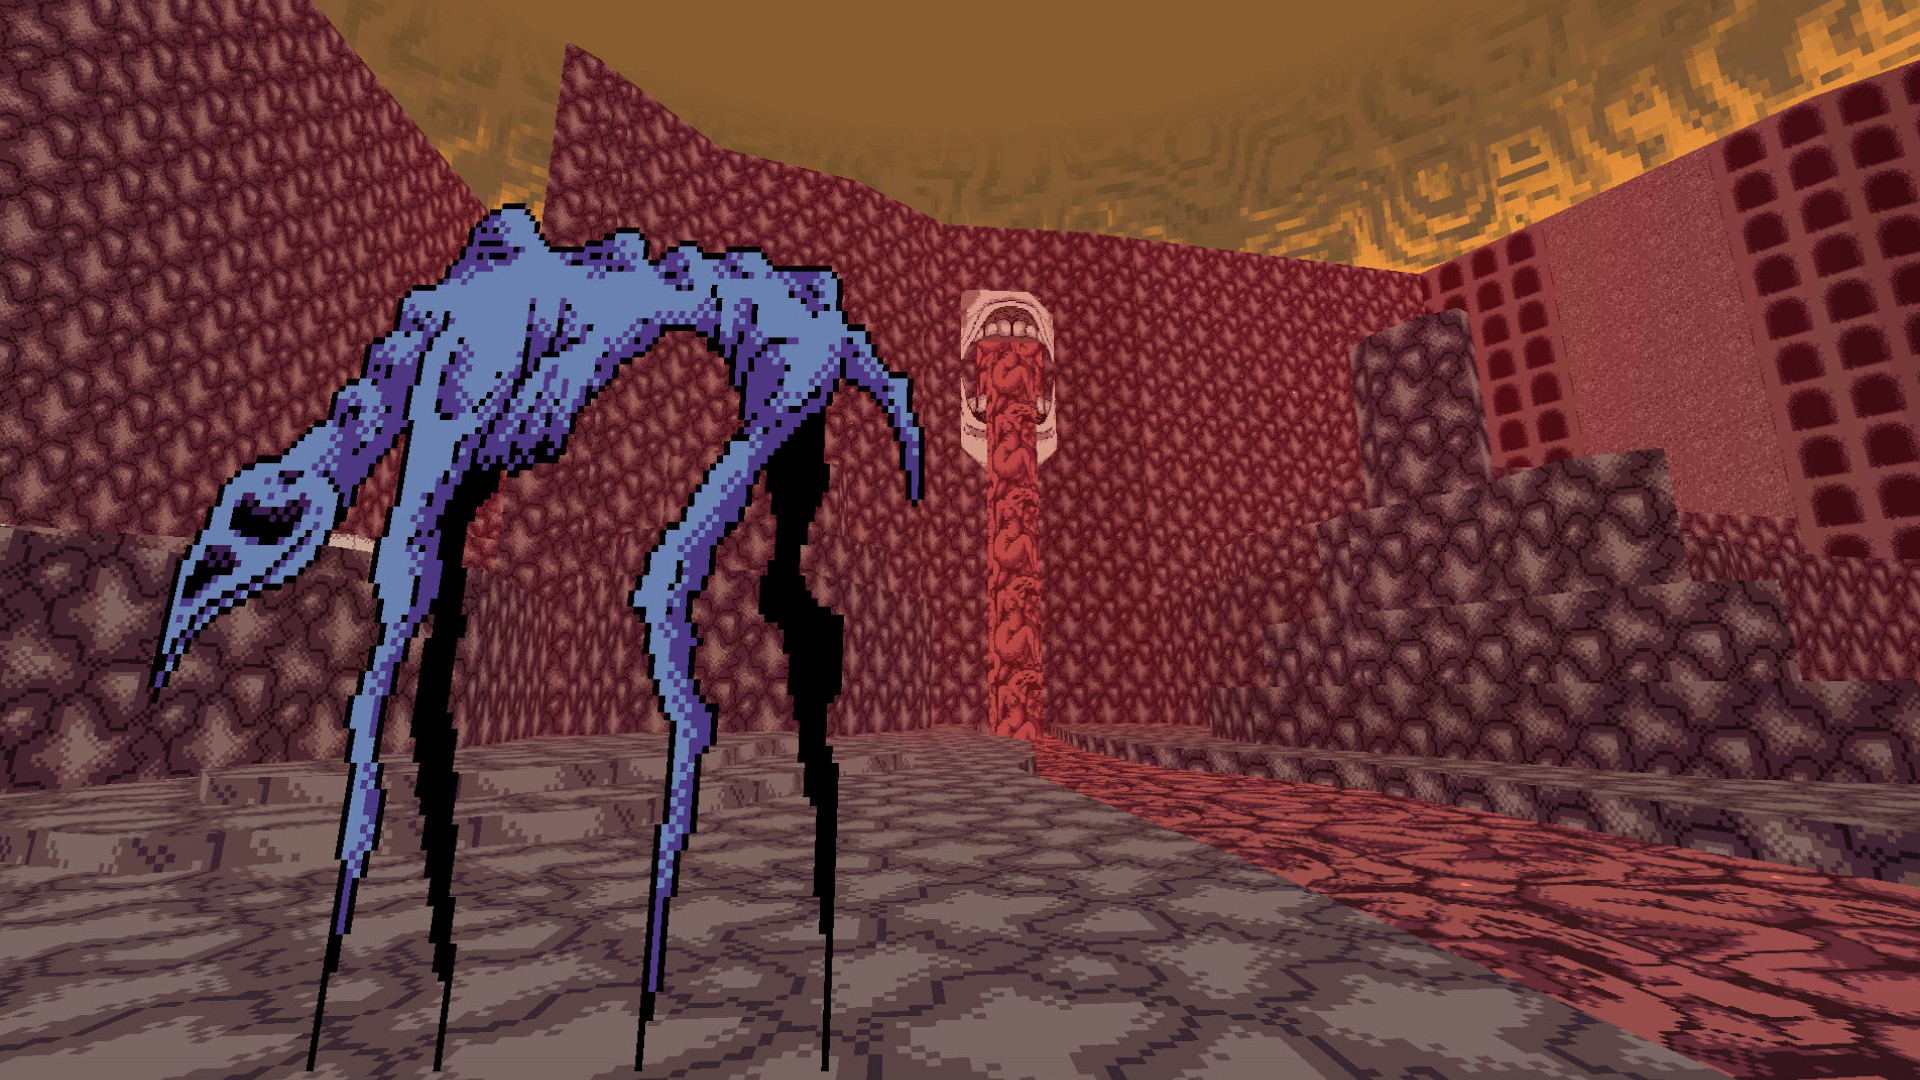 Picture Metroid Prime in the Doom engine, but a nightmare – that’s Vomitoreum